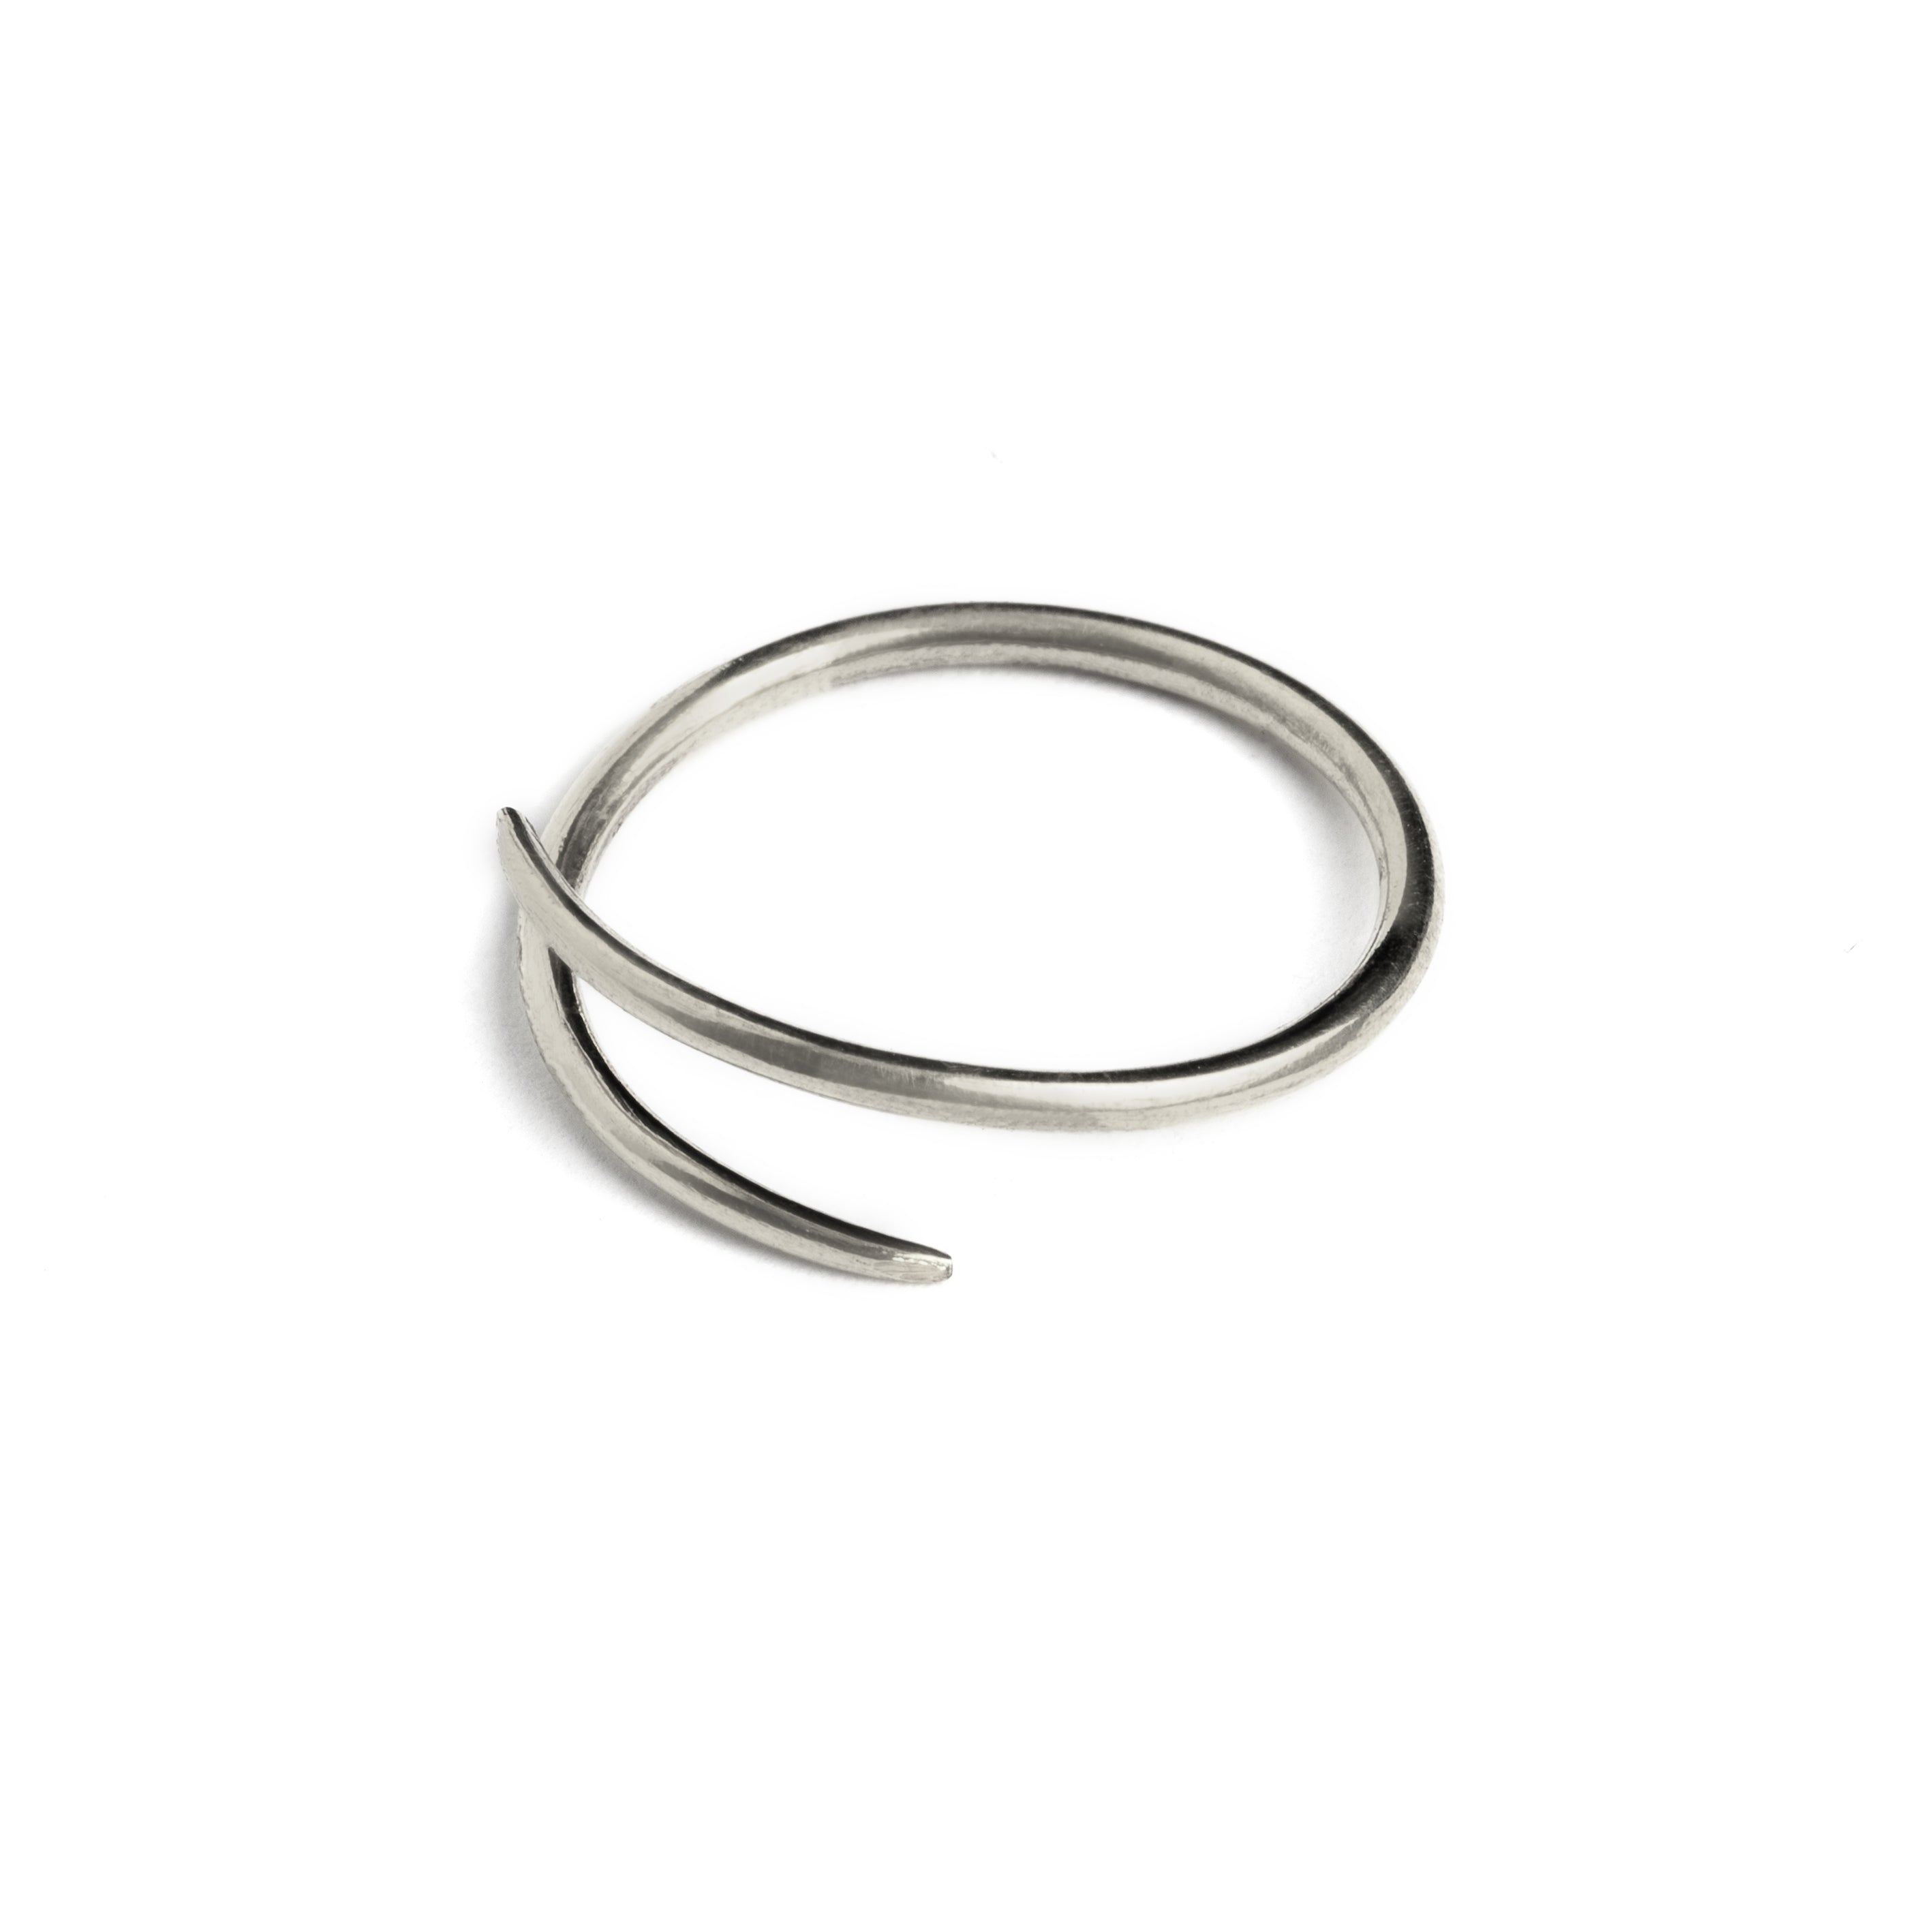 single silver wire circular hoop earring right side view